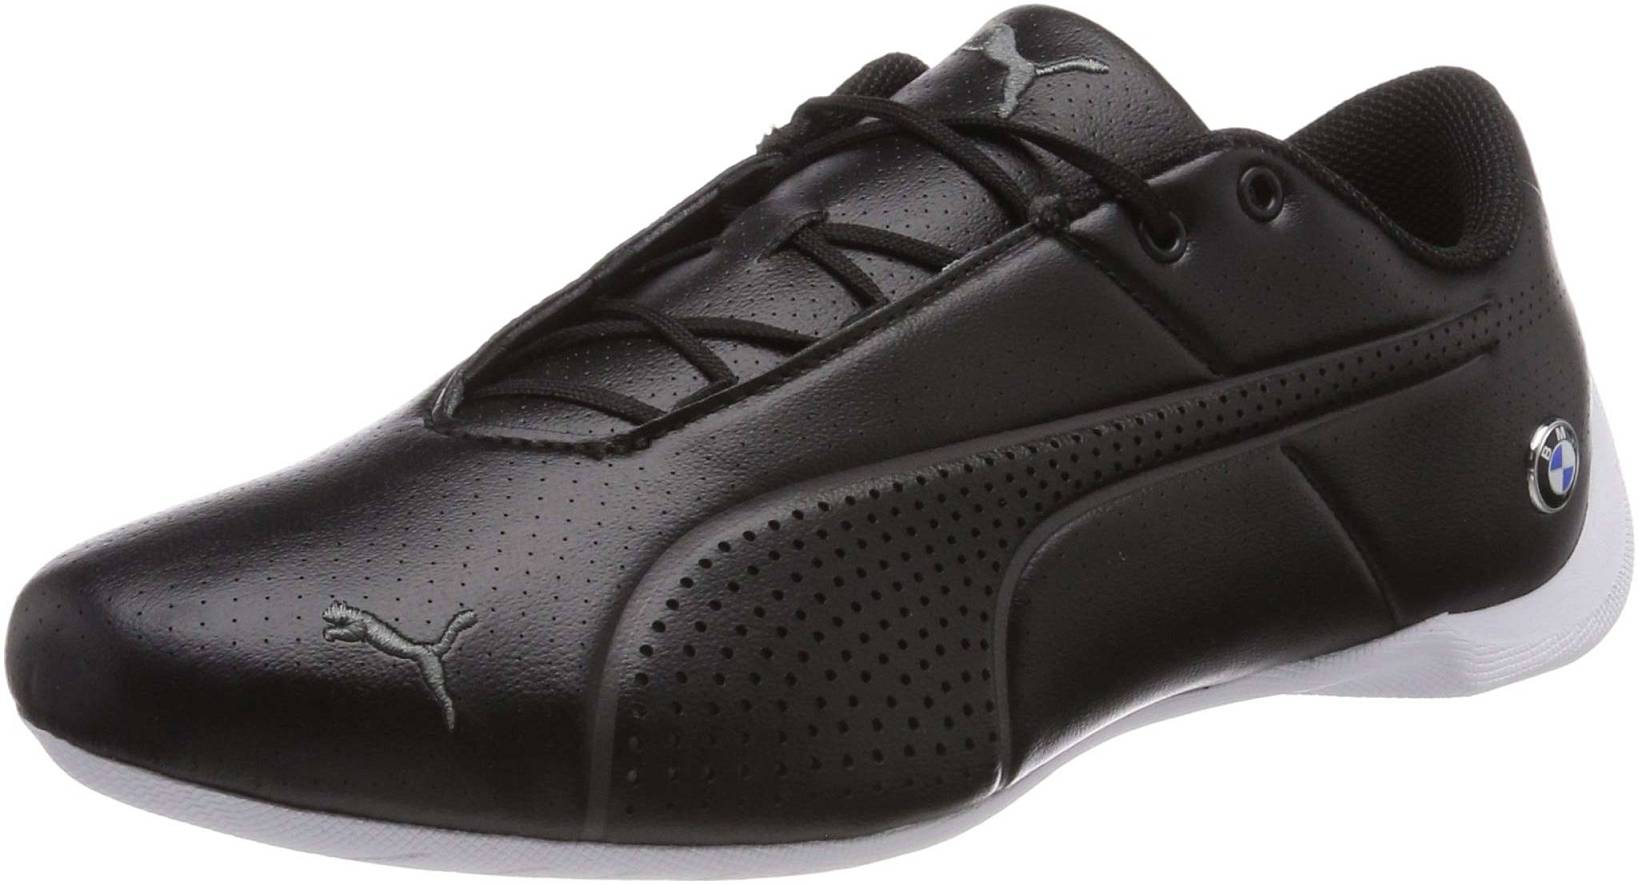 Puma BMW MMS Future Cat Ultra – Shoes Reviews & Reasons To Buy